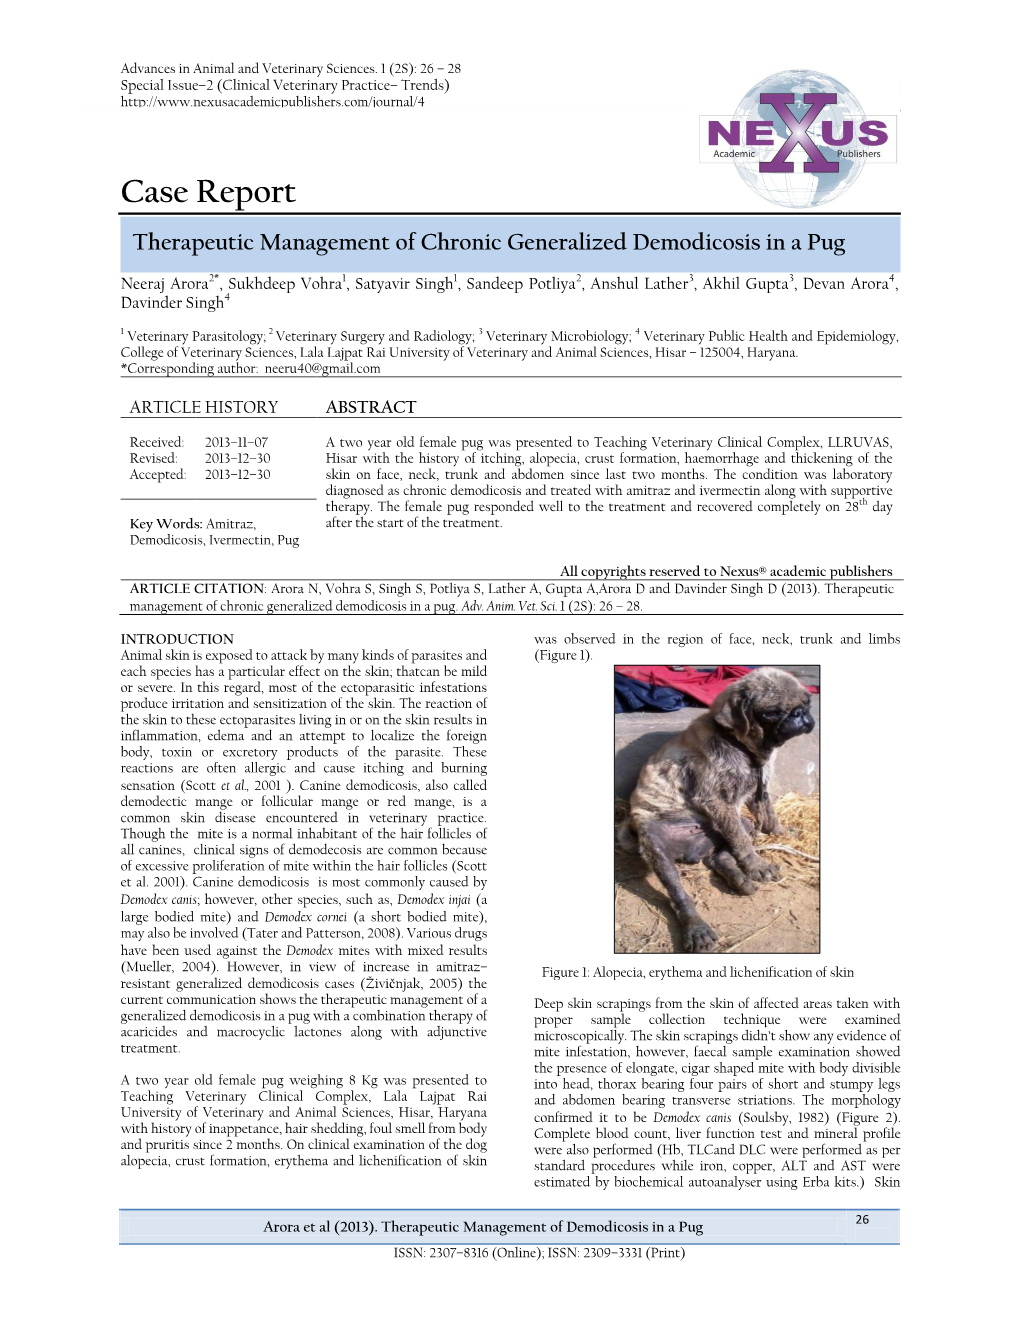 Case Report Therapeutic Management of Chronic Generalized Demodicosis in a Pug